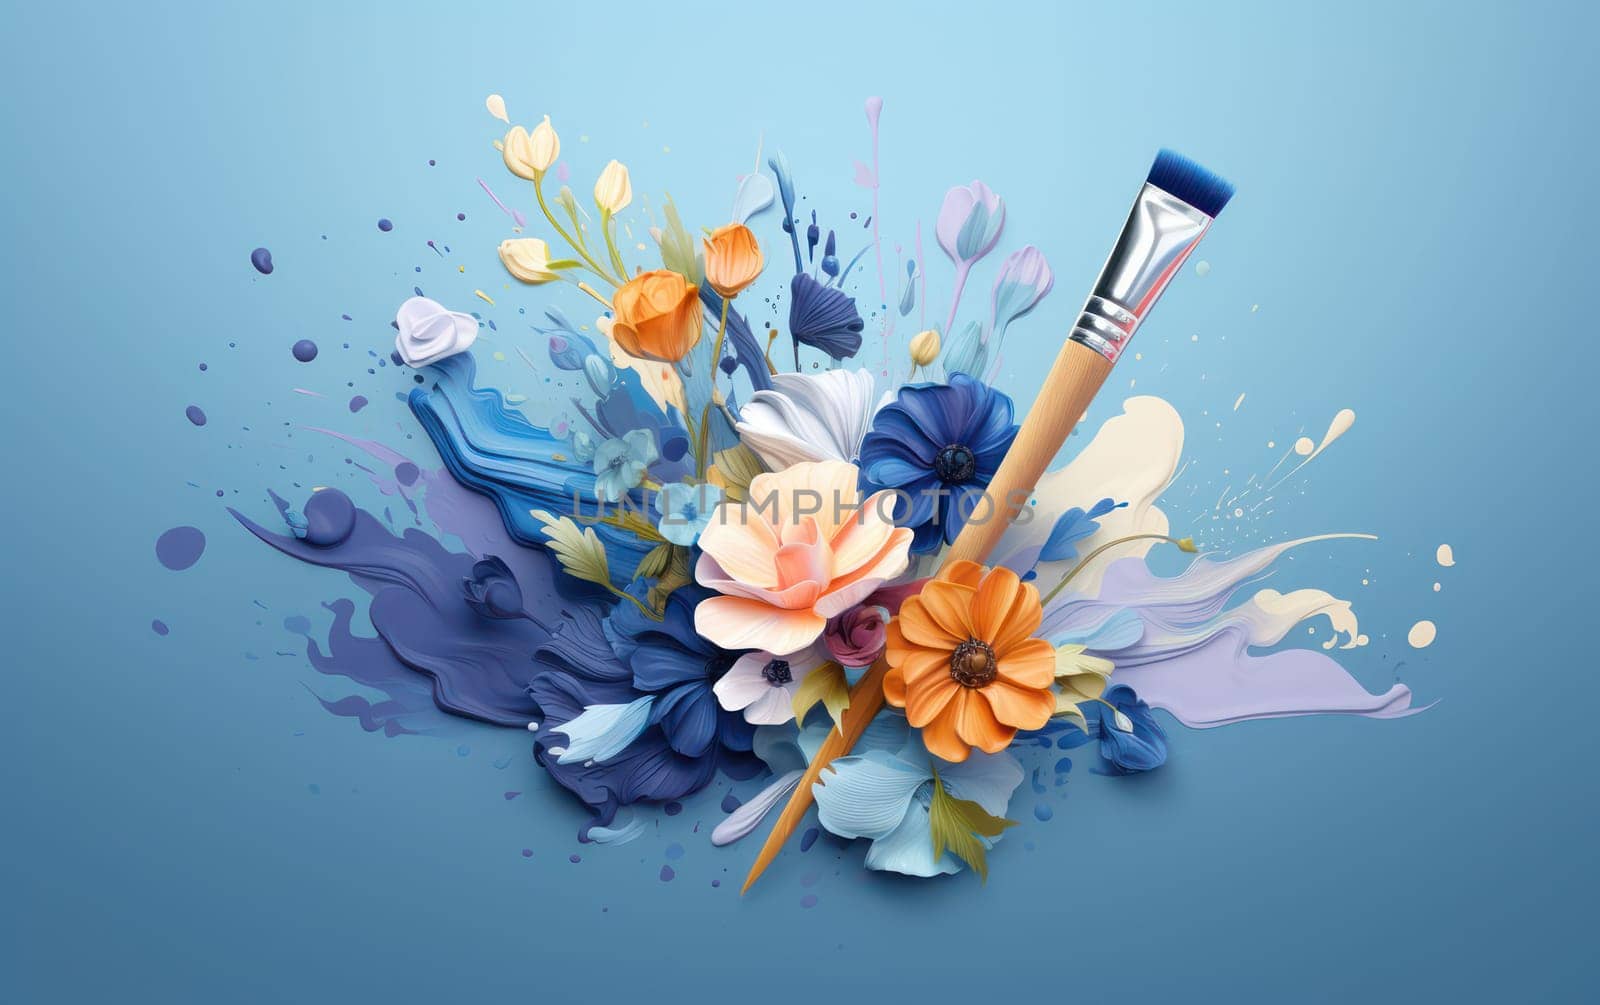 Colorful Brush Strokes on Paper: A Vibrant Artistic Creation for Makeup Enthusiasts by Vichizh